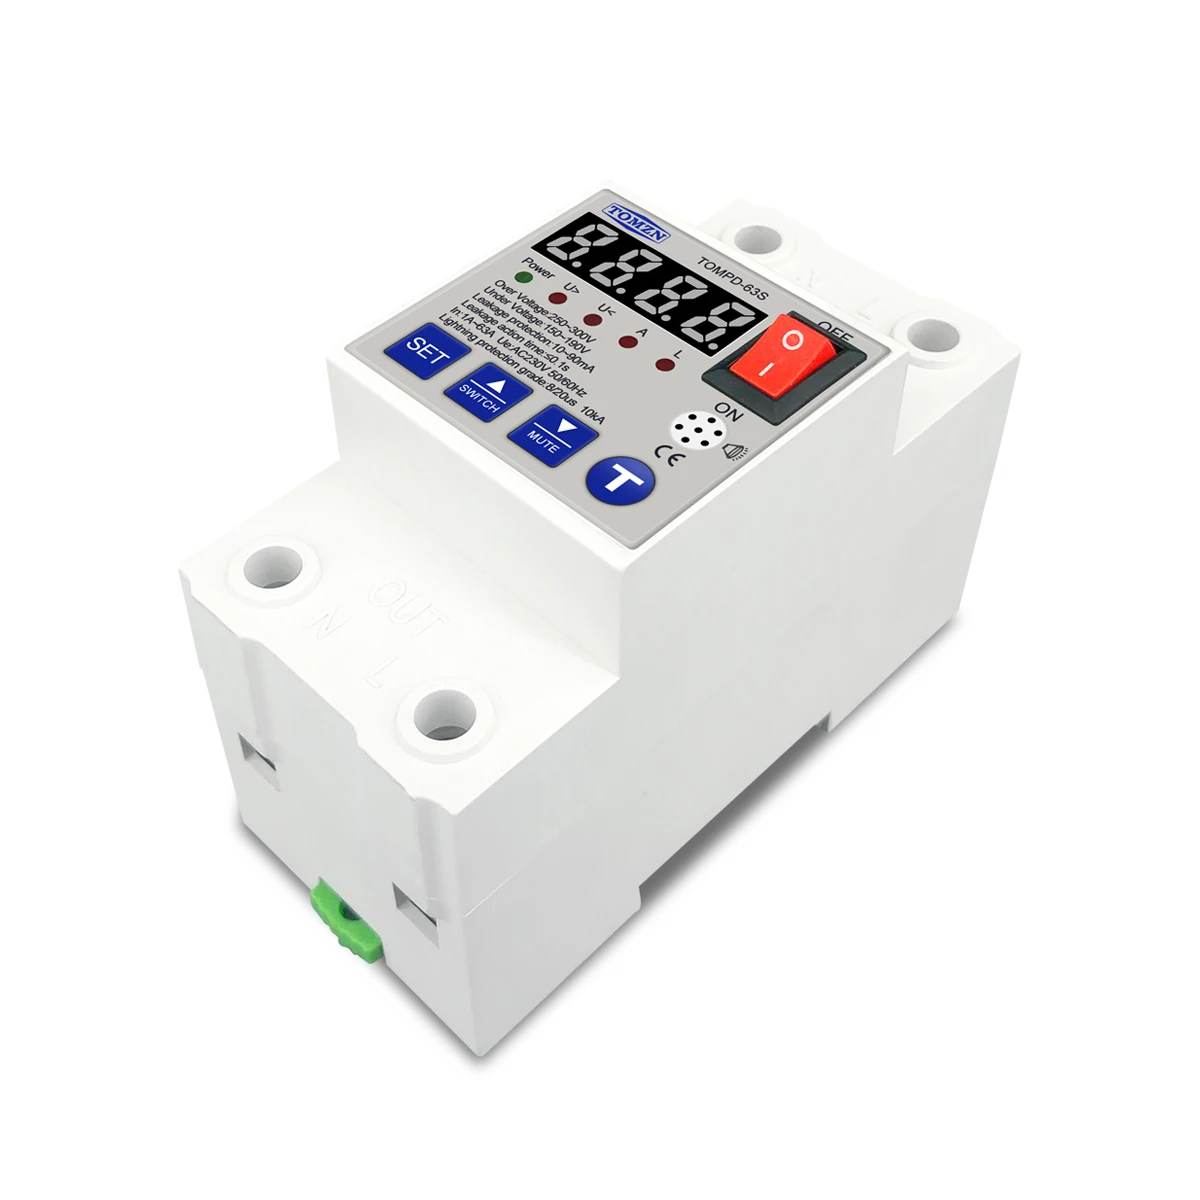 Details about   Automatic Leakage Protection Circuit Breaker 63A 230V Over Under Voltage Surge 